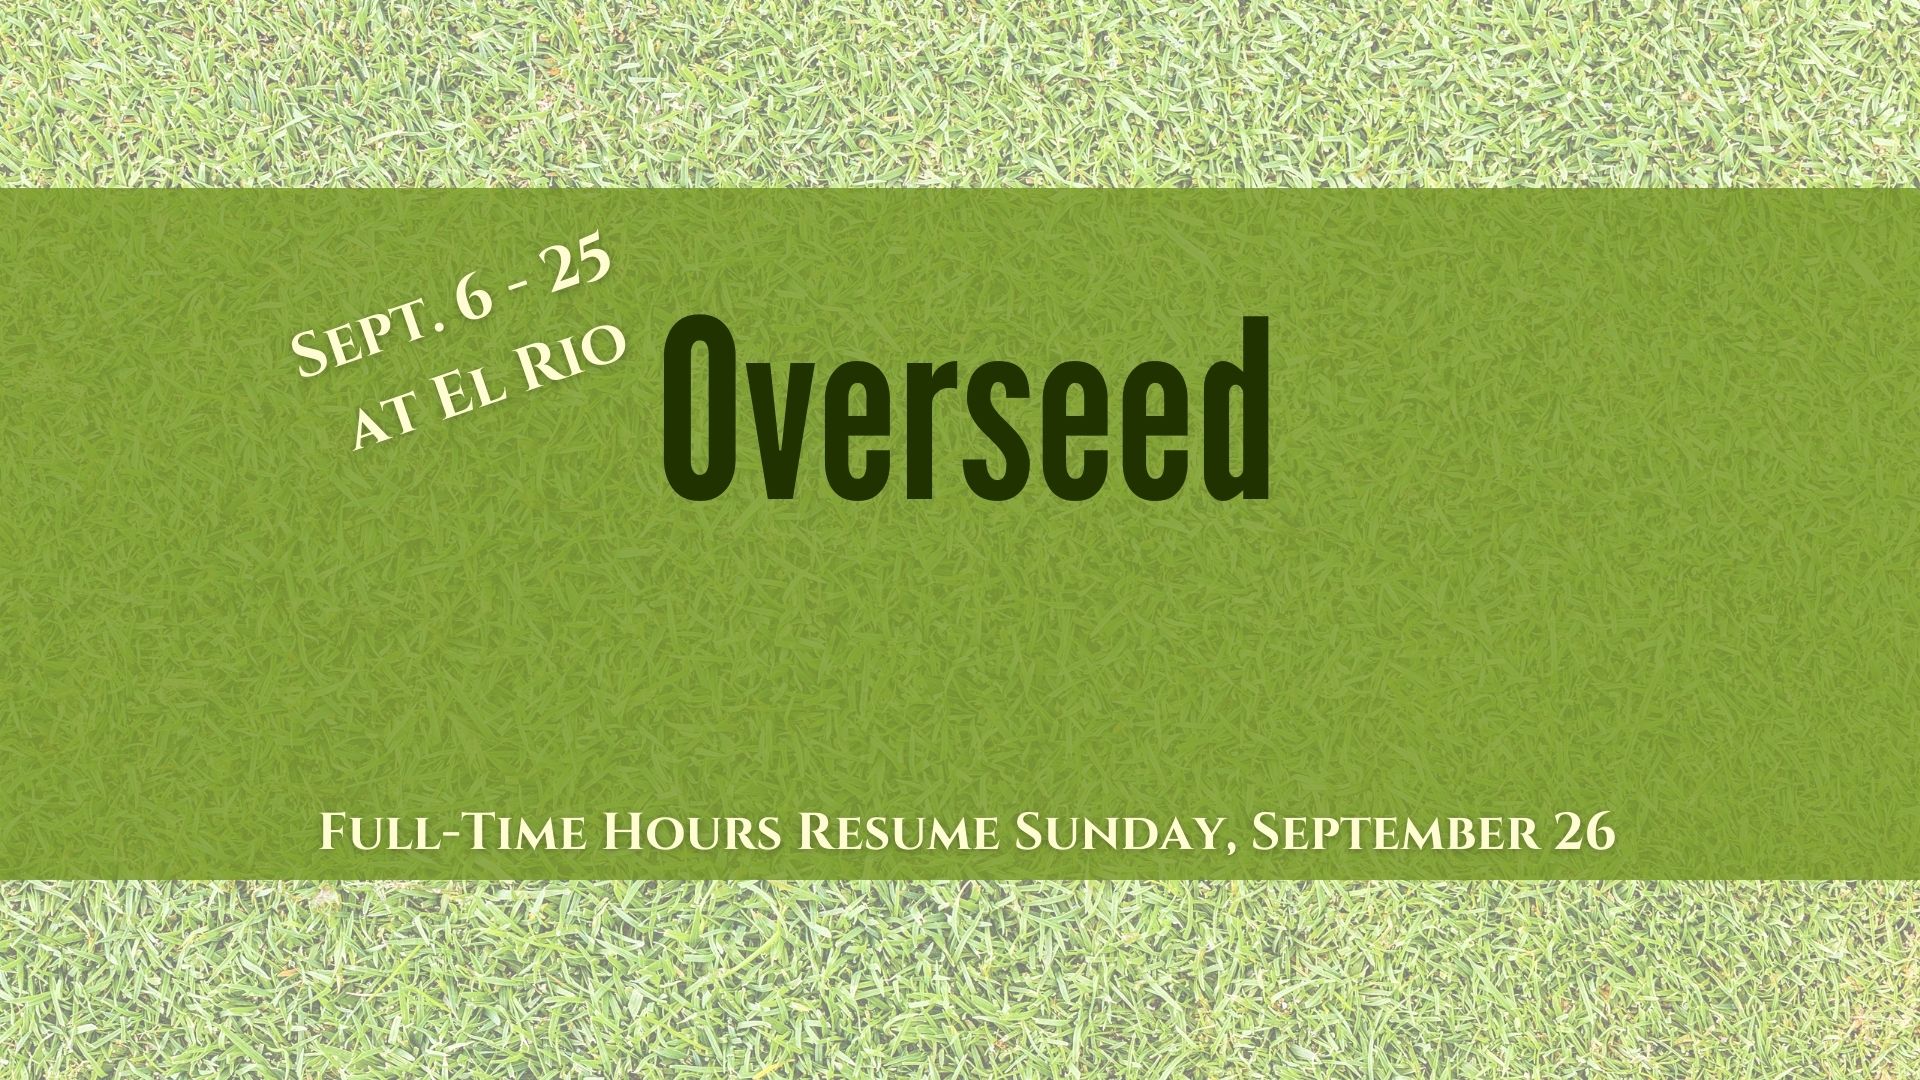 Course Closed Sept. 6 – 25